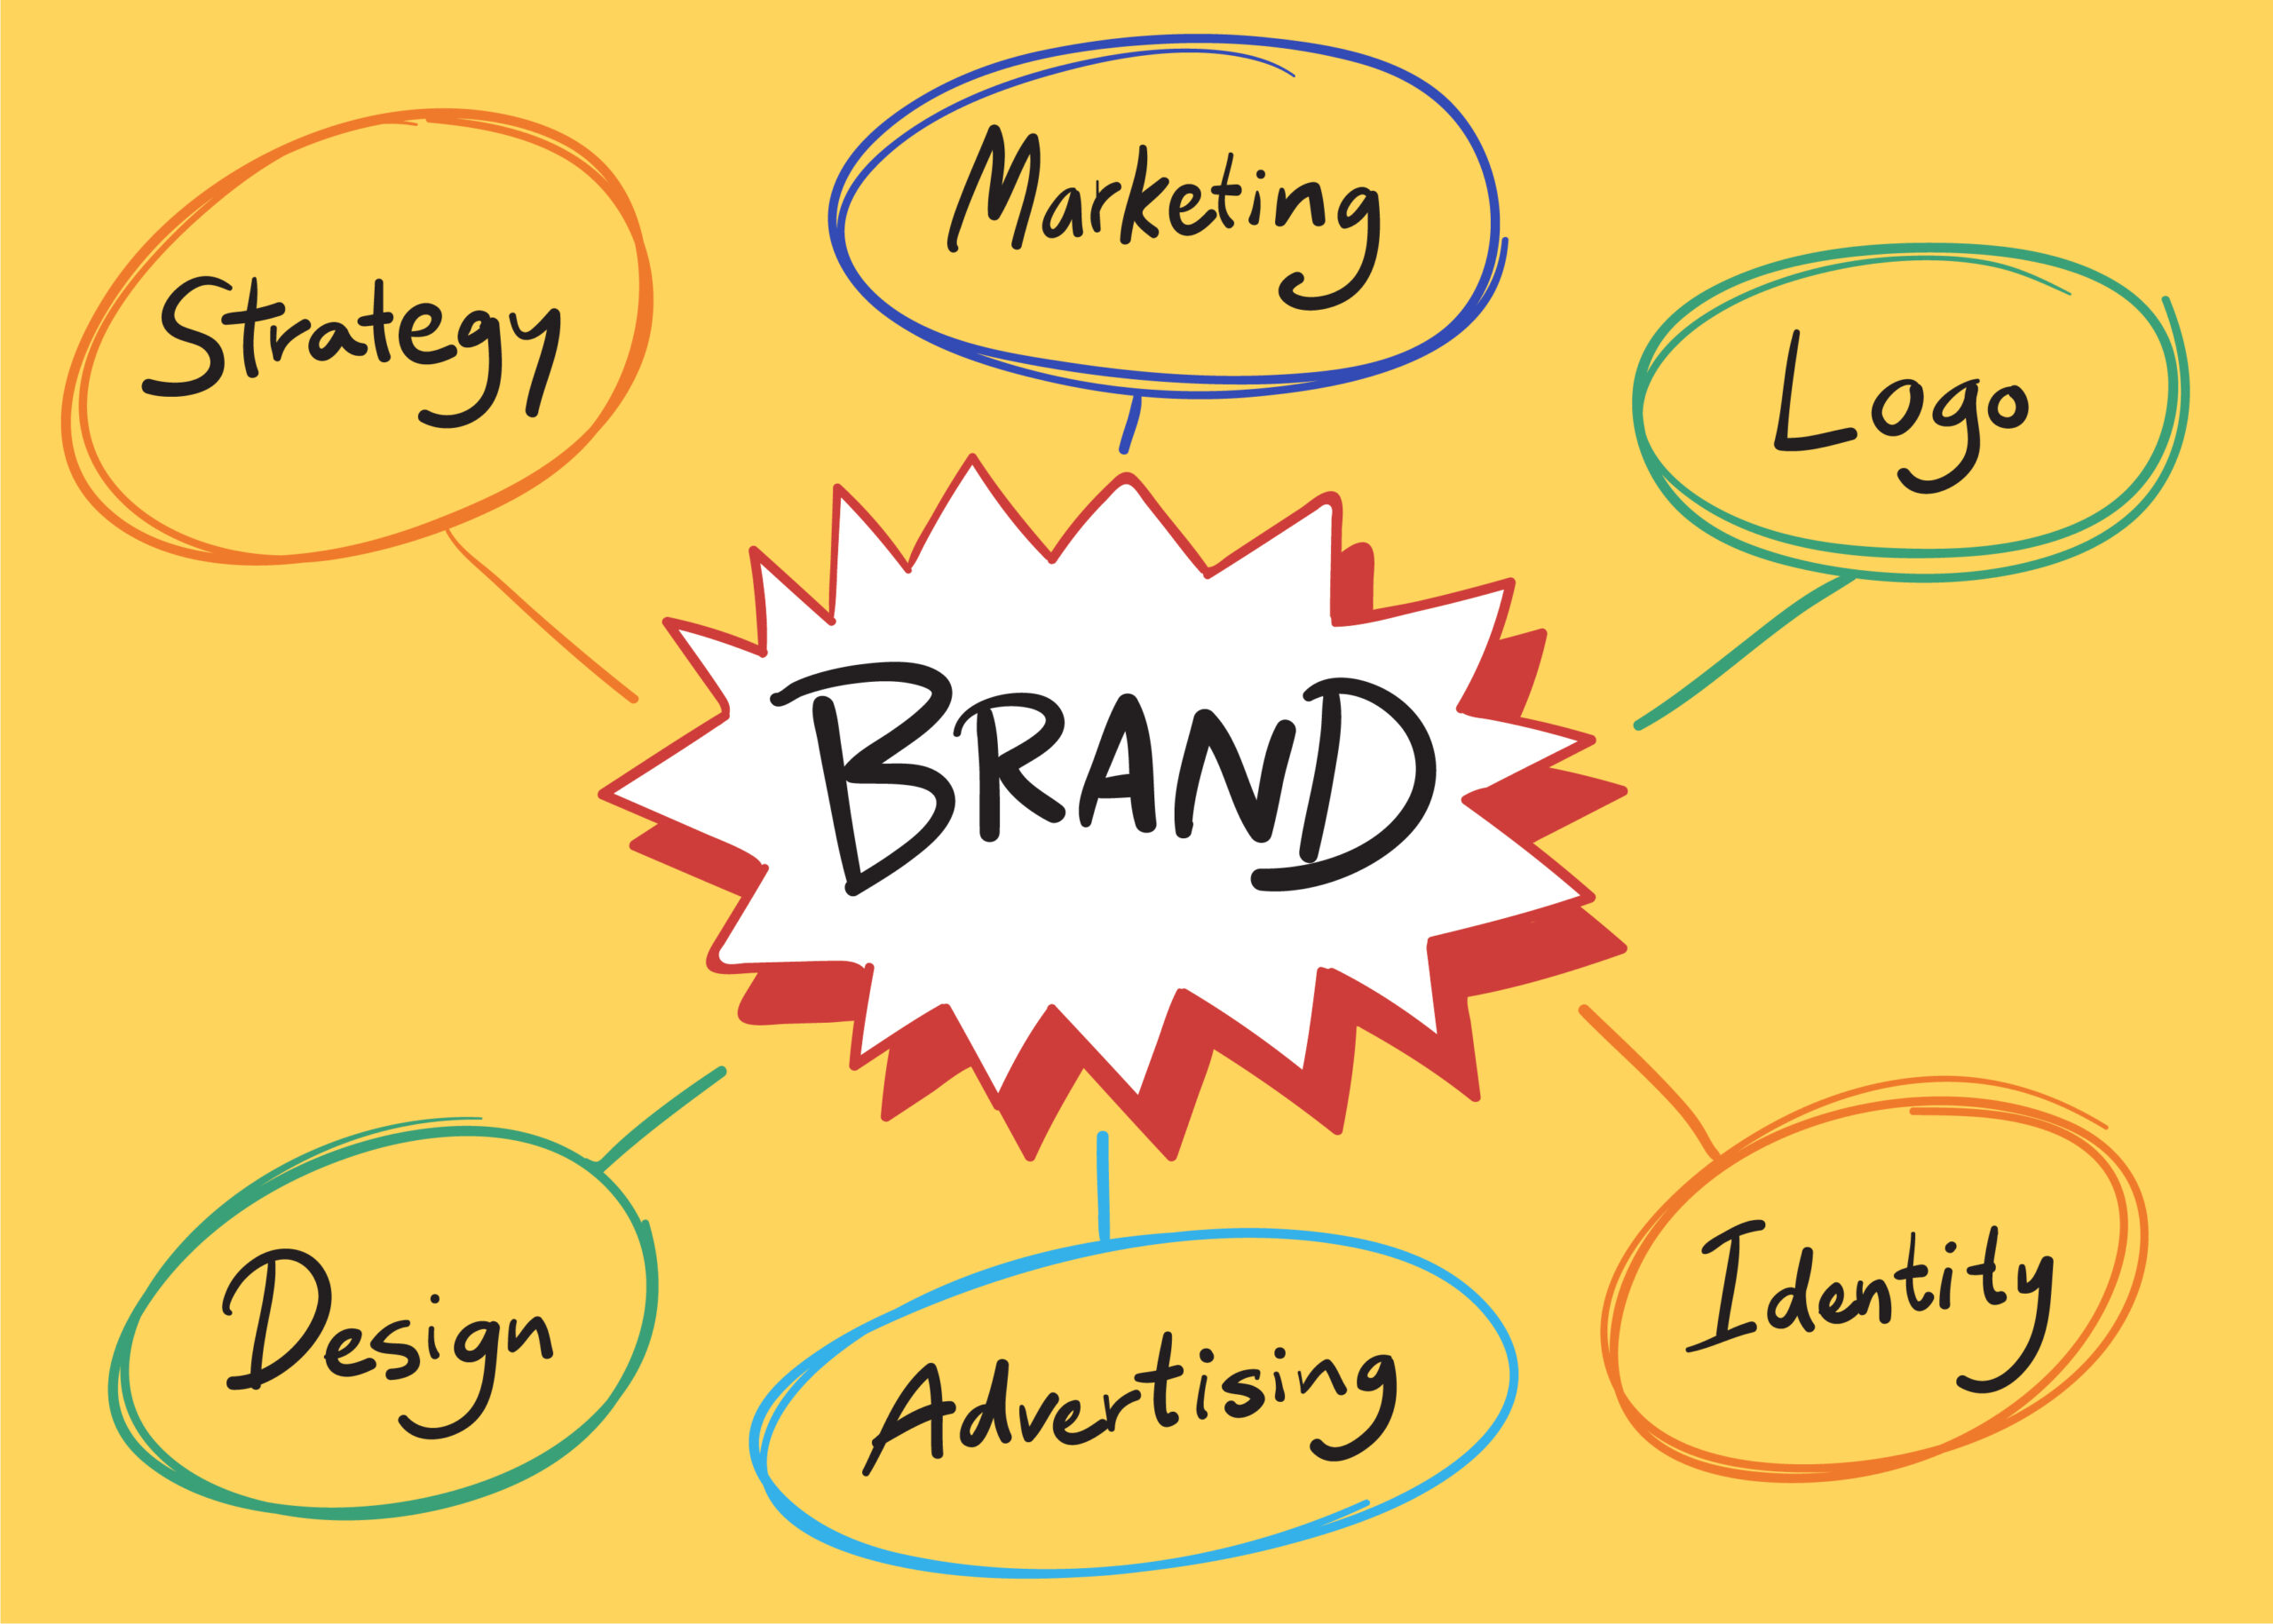 Diagram showing branding and marketing strategy with colorful arrows and icons.